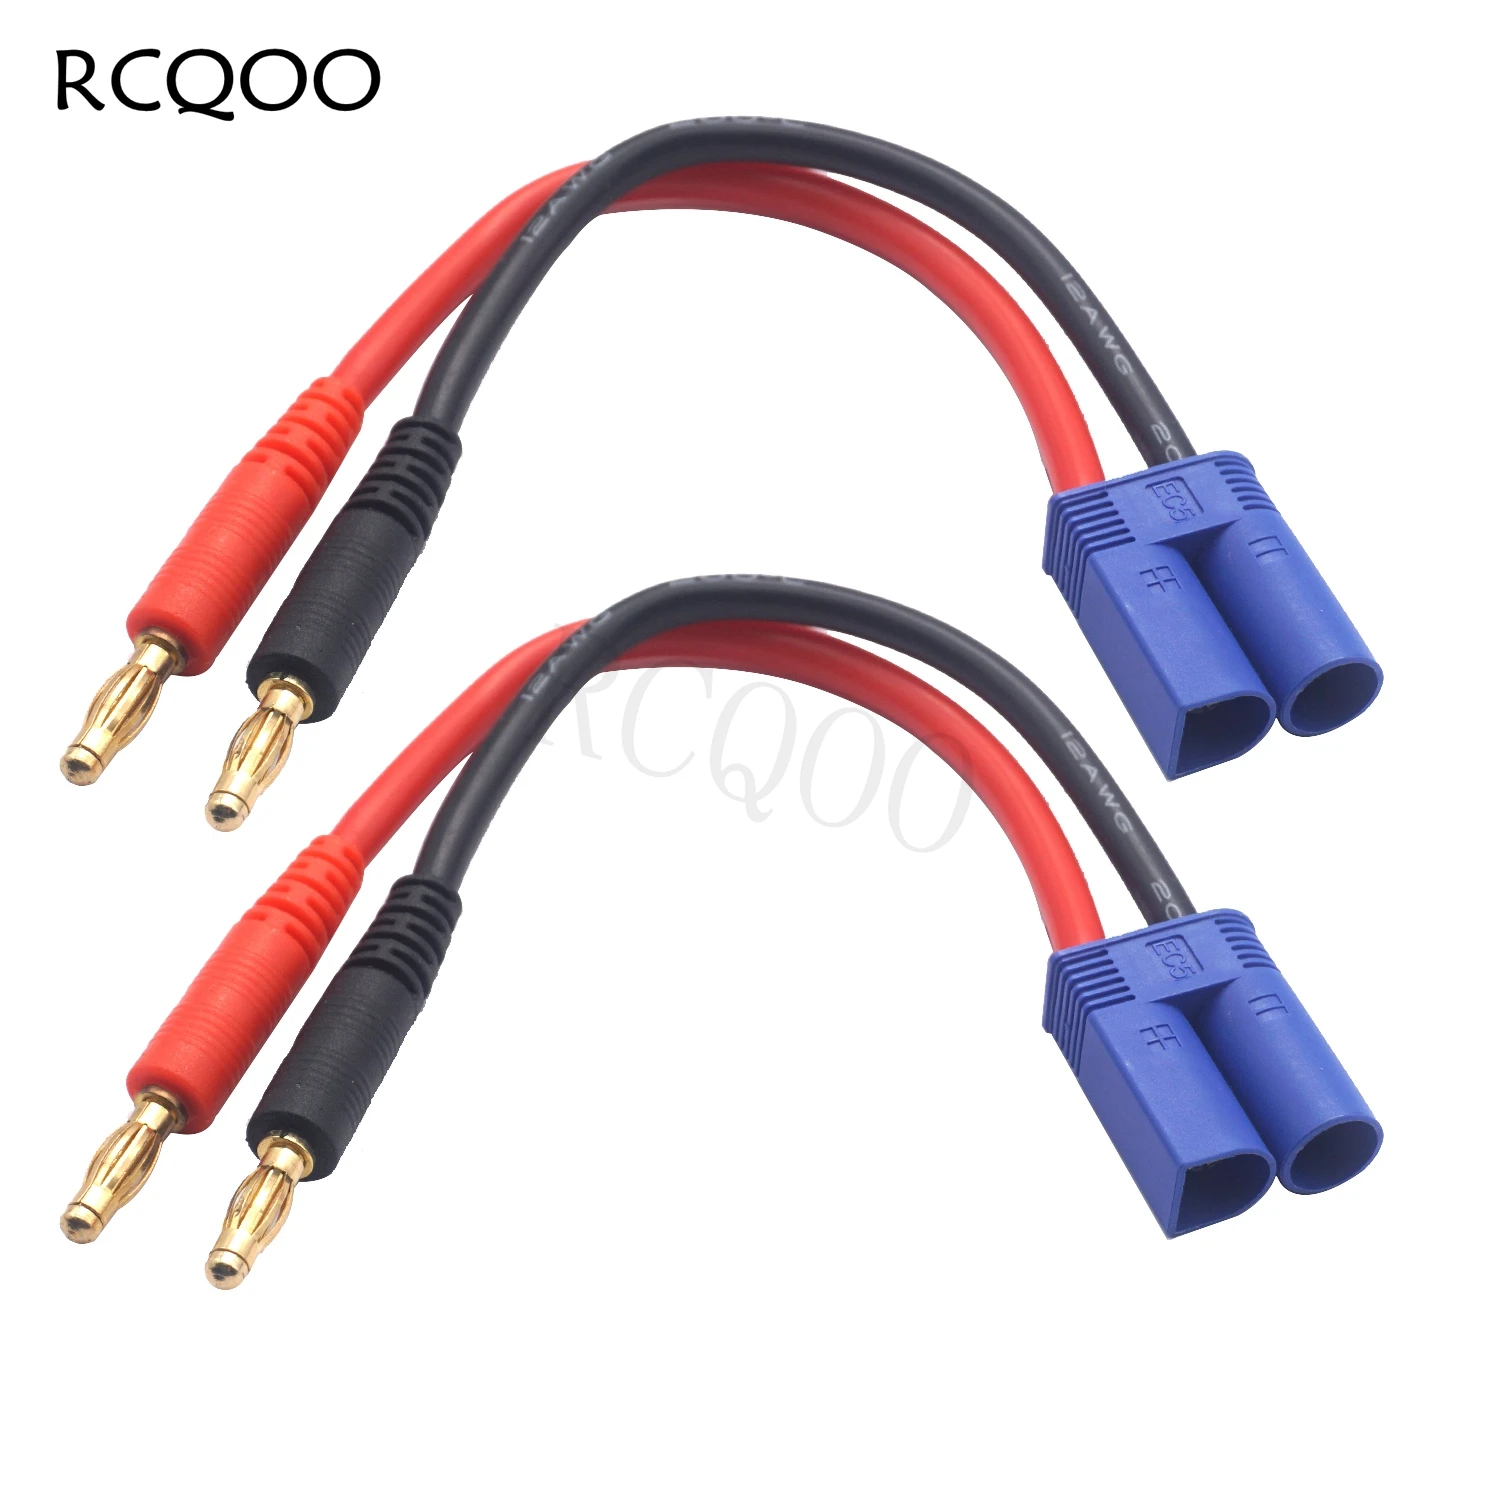 

2Pack 15CM/12AWG EC5 Male Style Plug to 4mm Bullet Banana Connector Battery Charger Charging Cable Wire for RC Car Truck